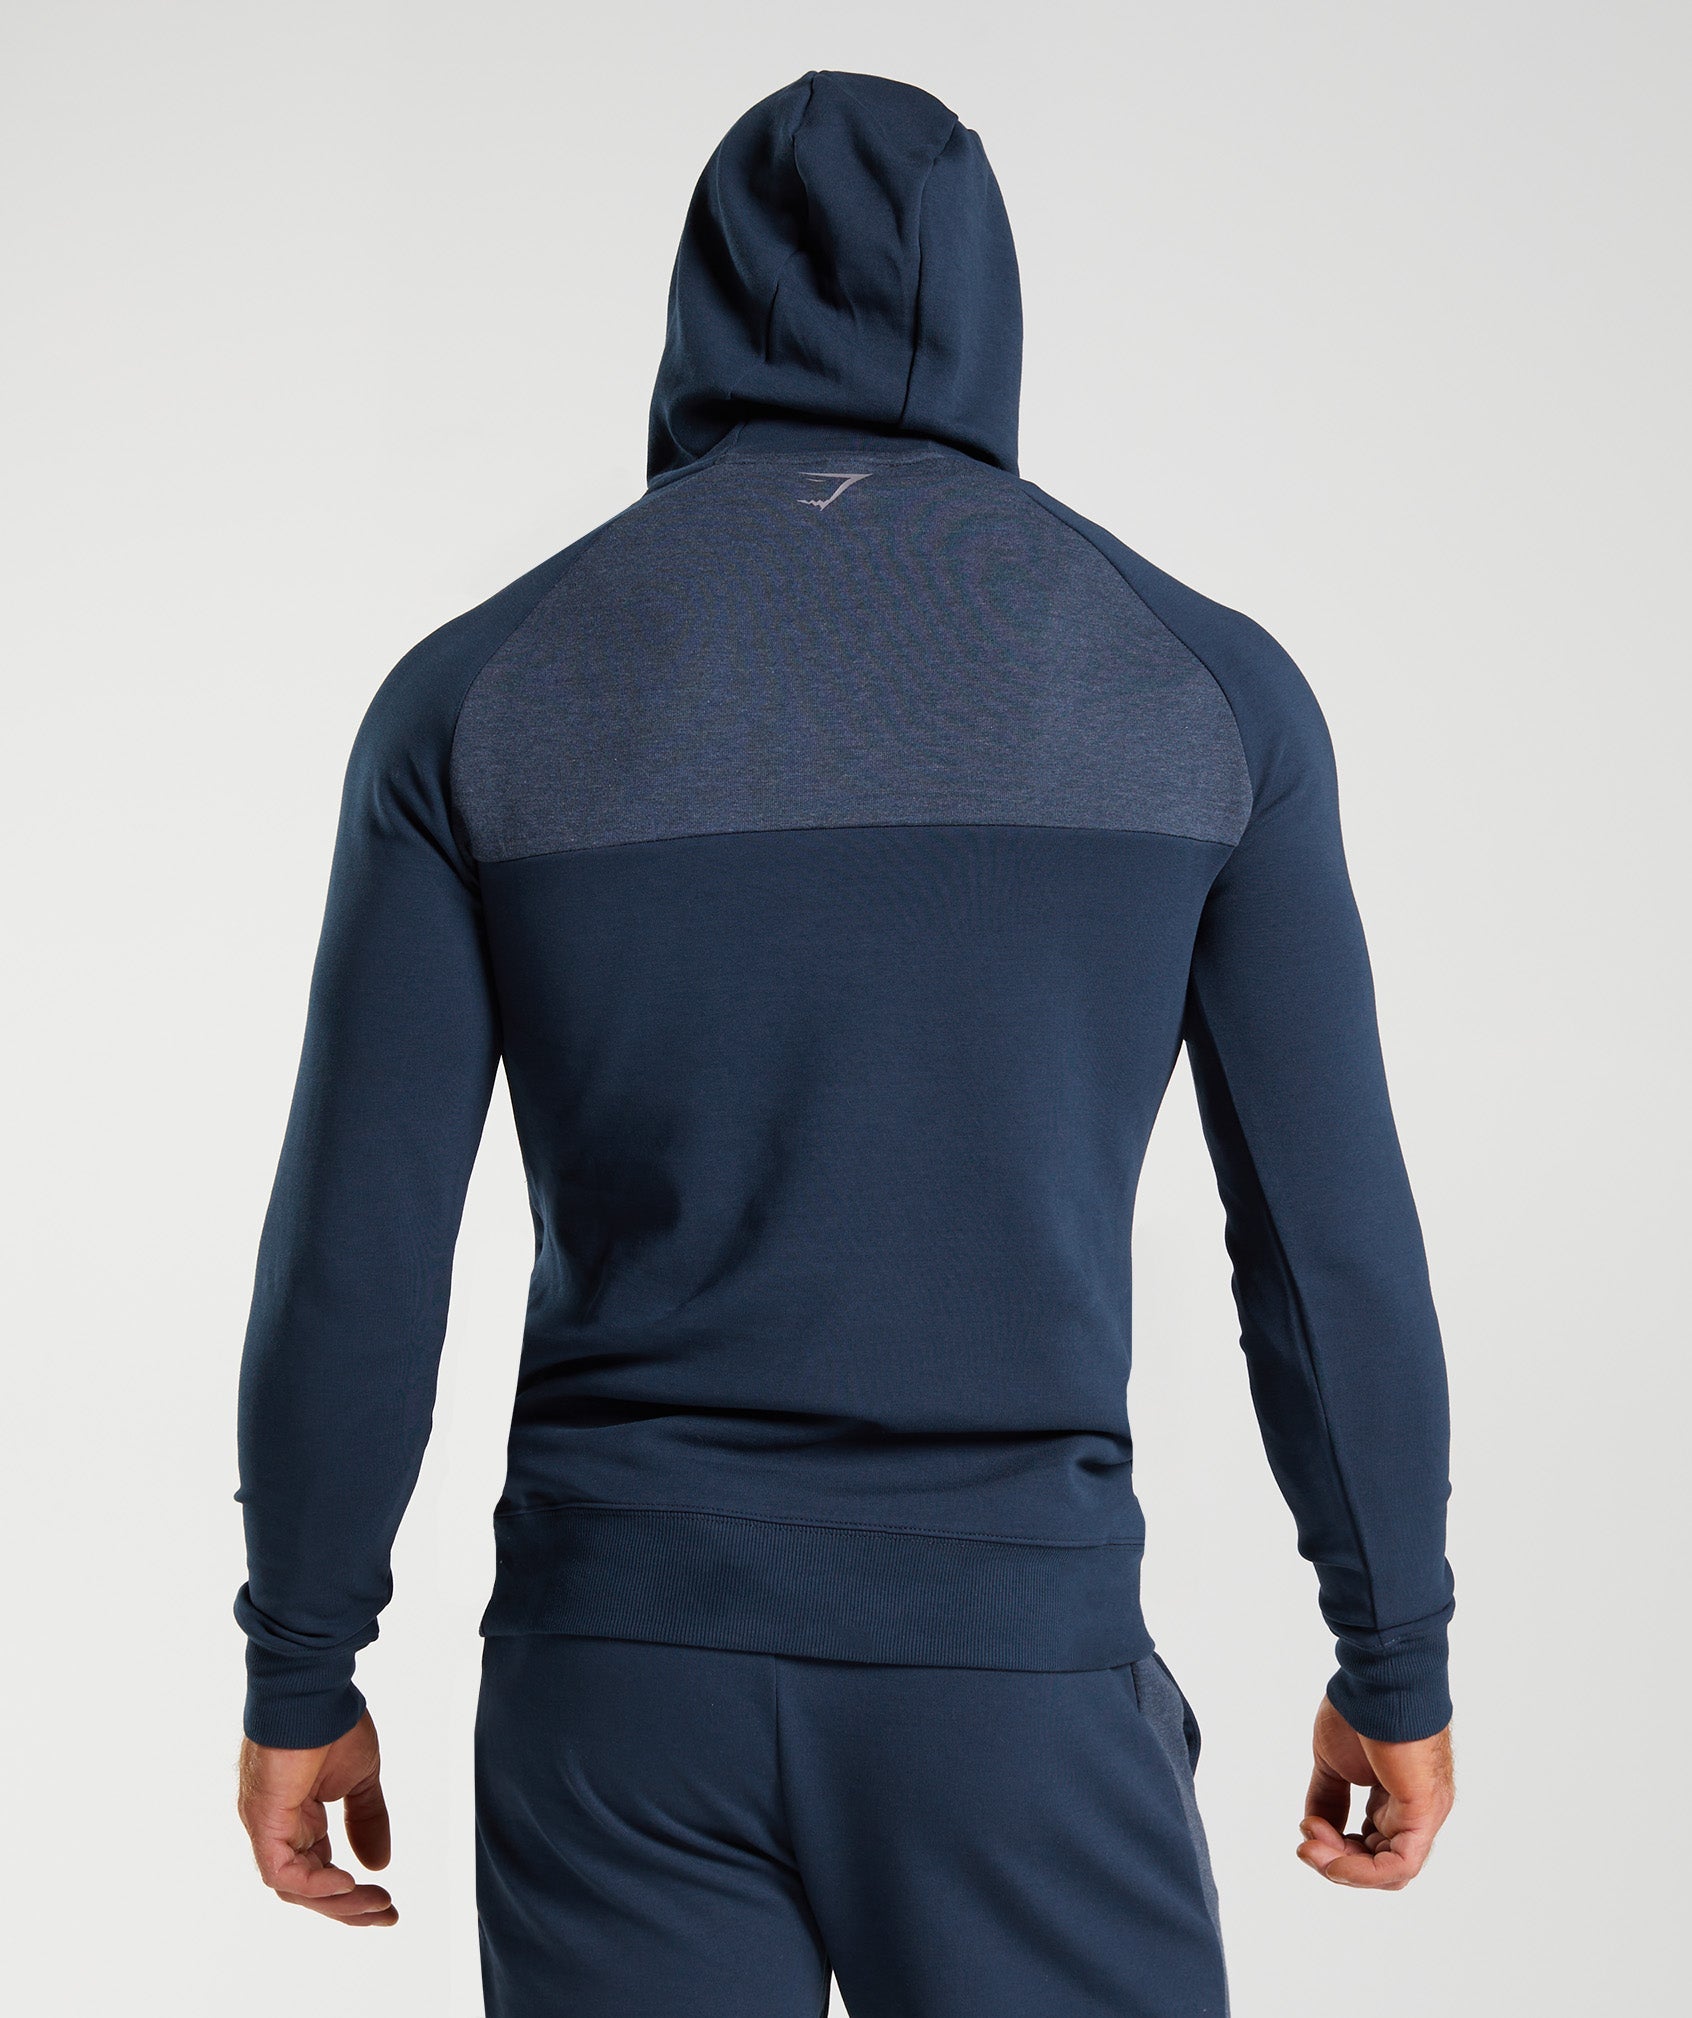 Bold React Hoodie in Navy - view 2